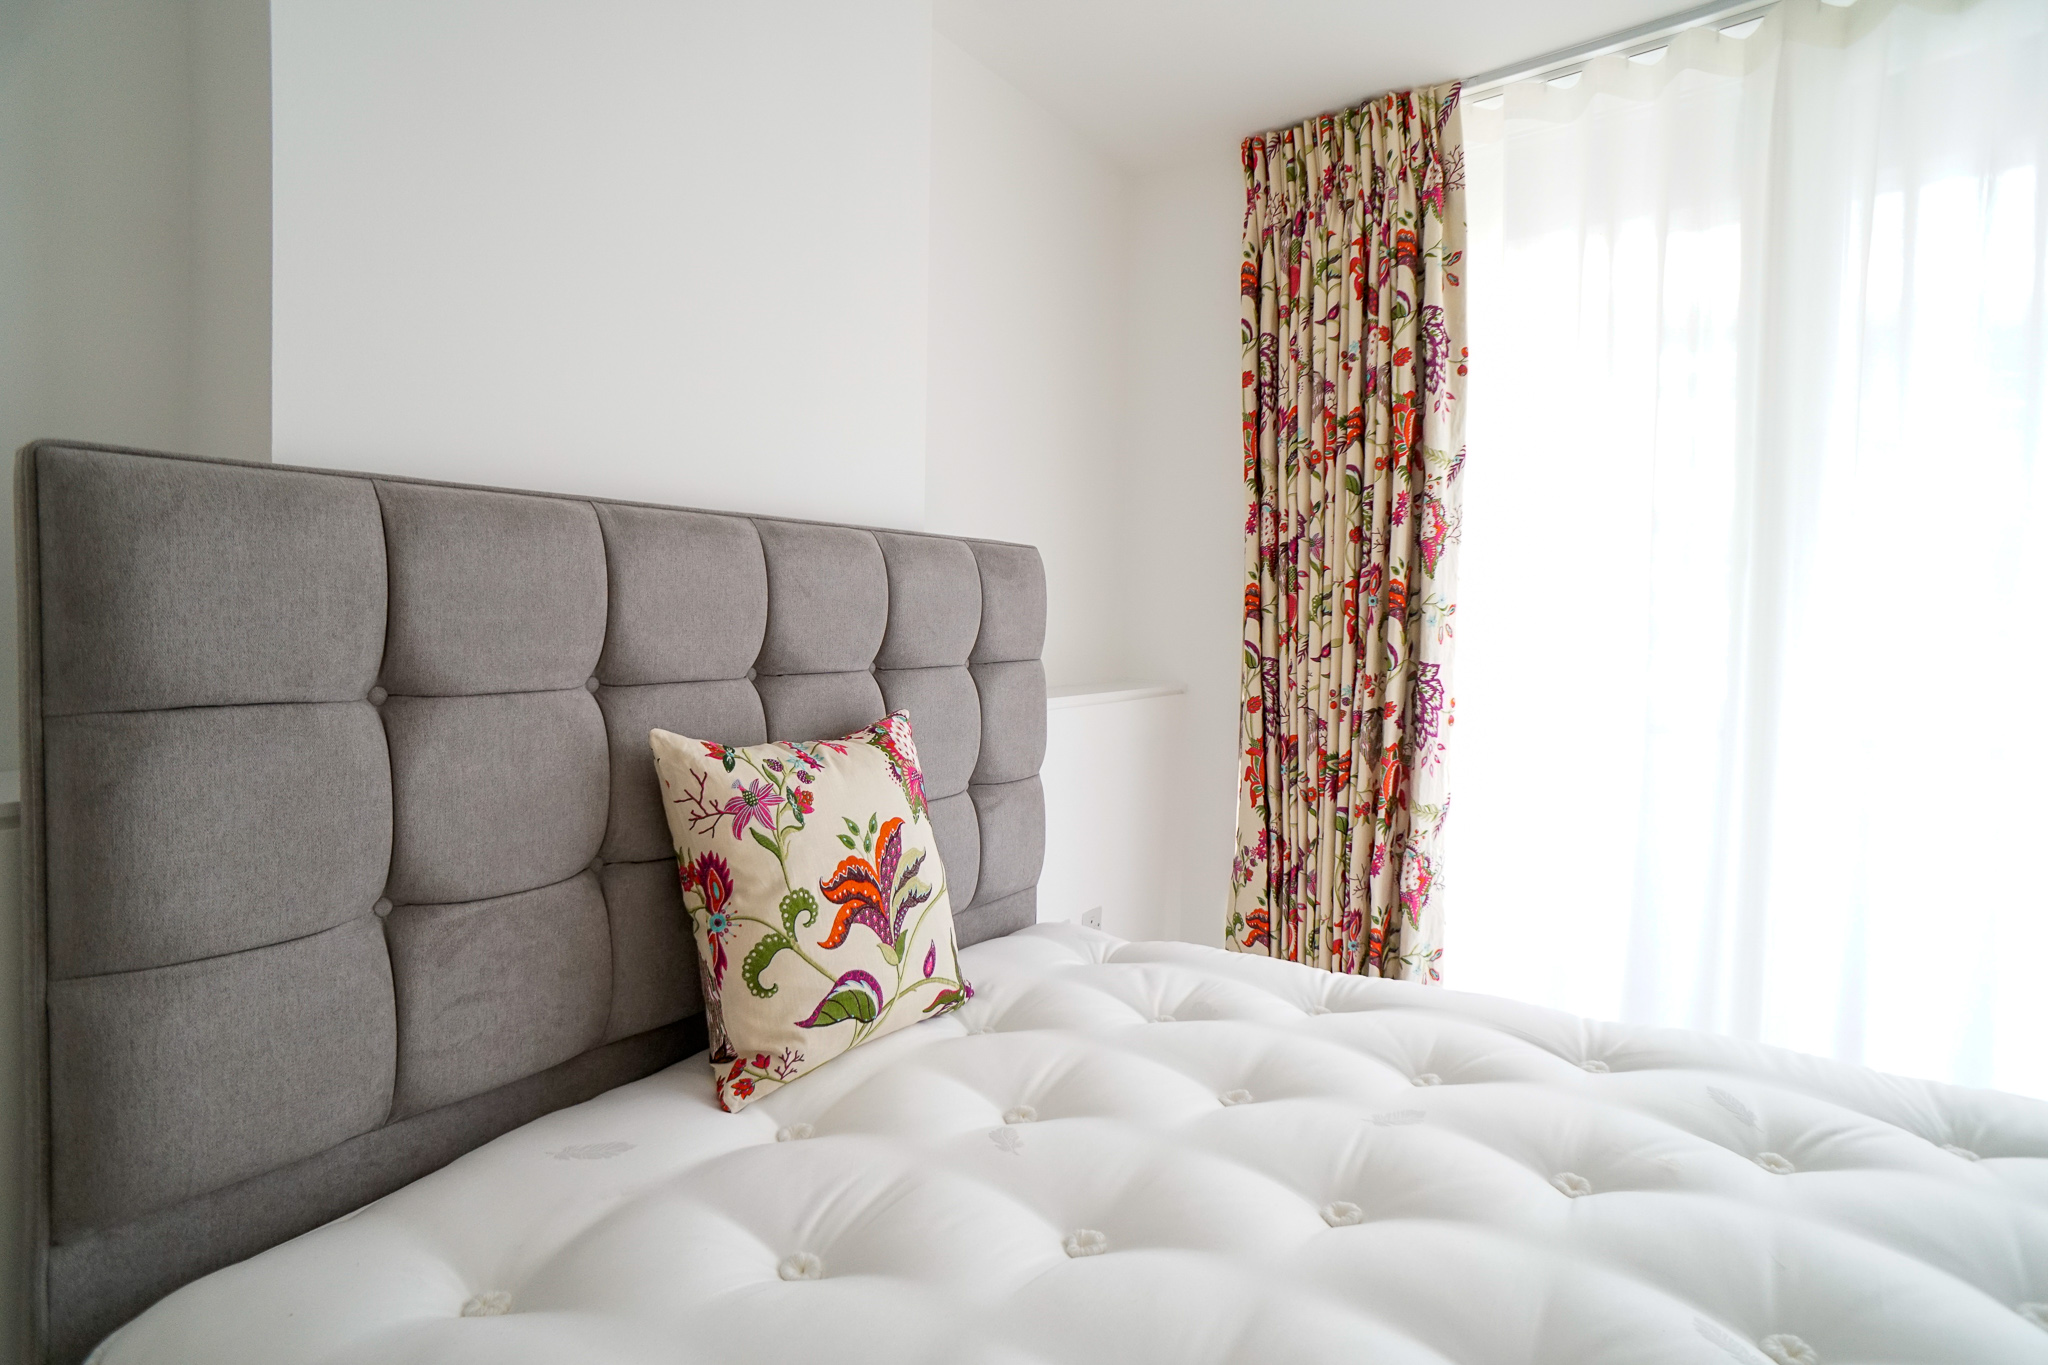 Headboard with upholstered cushion and bespoke curtains